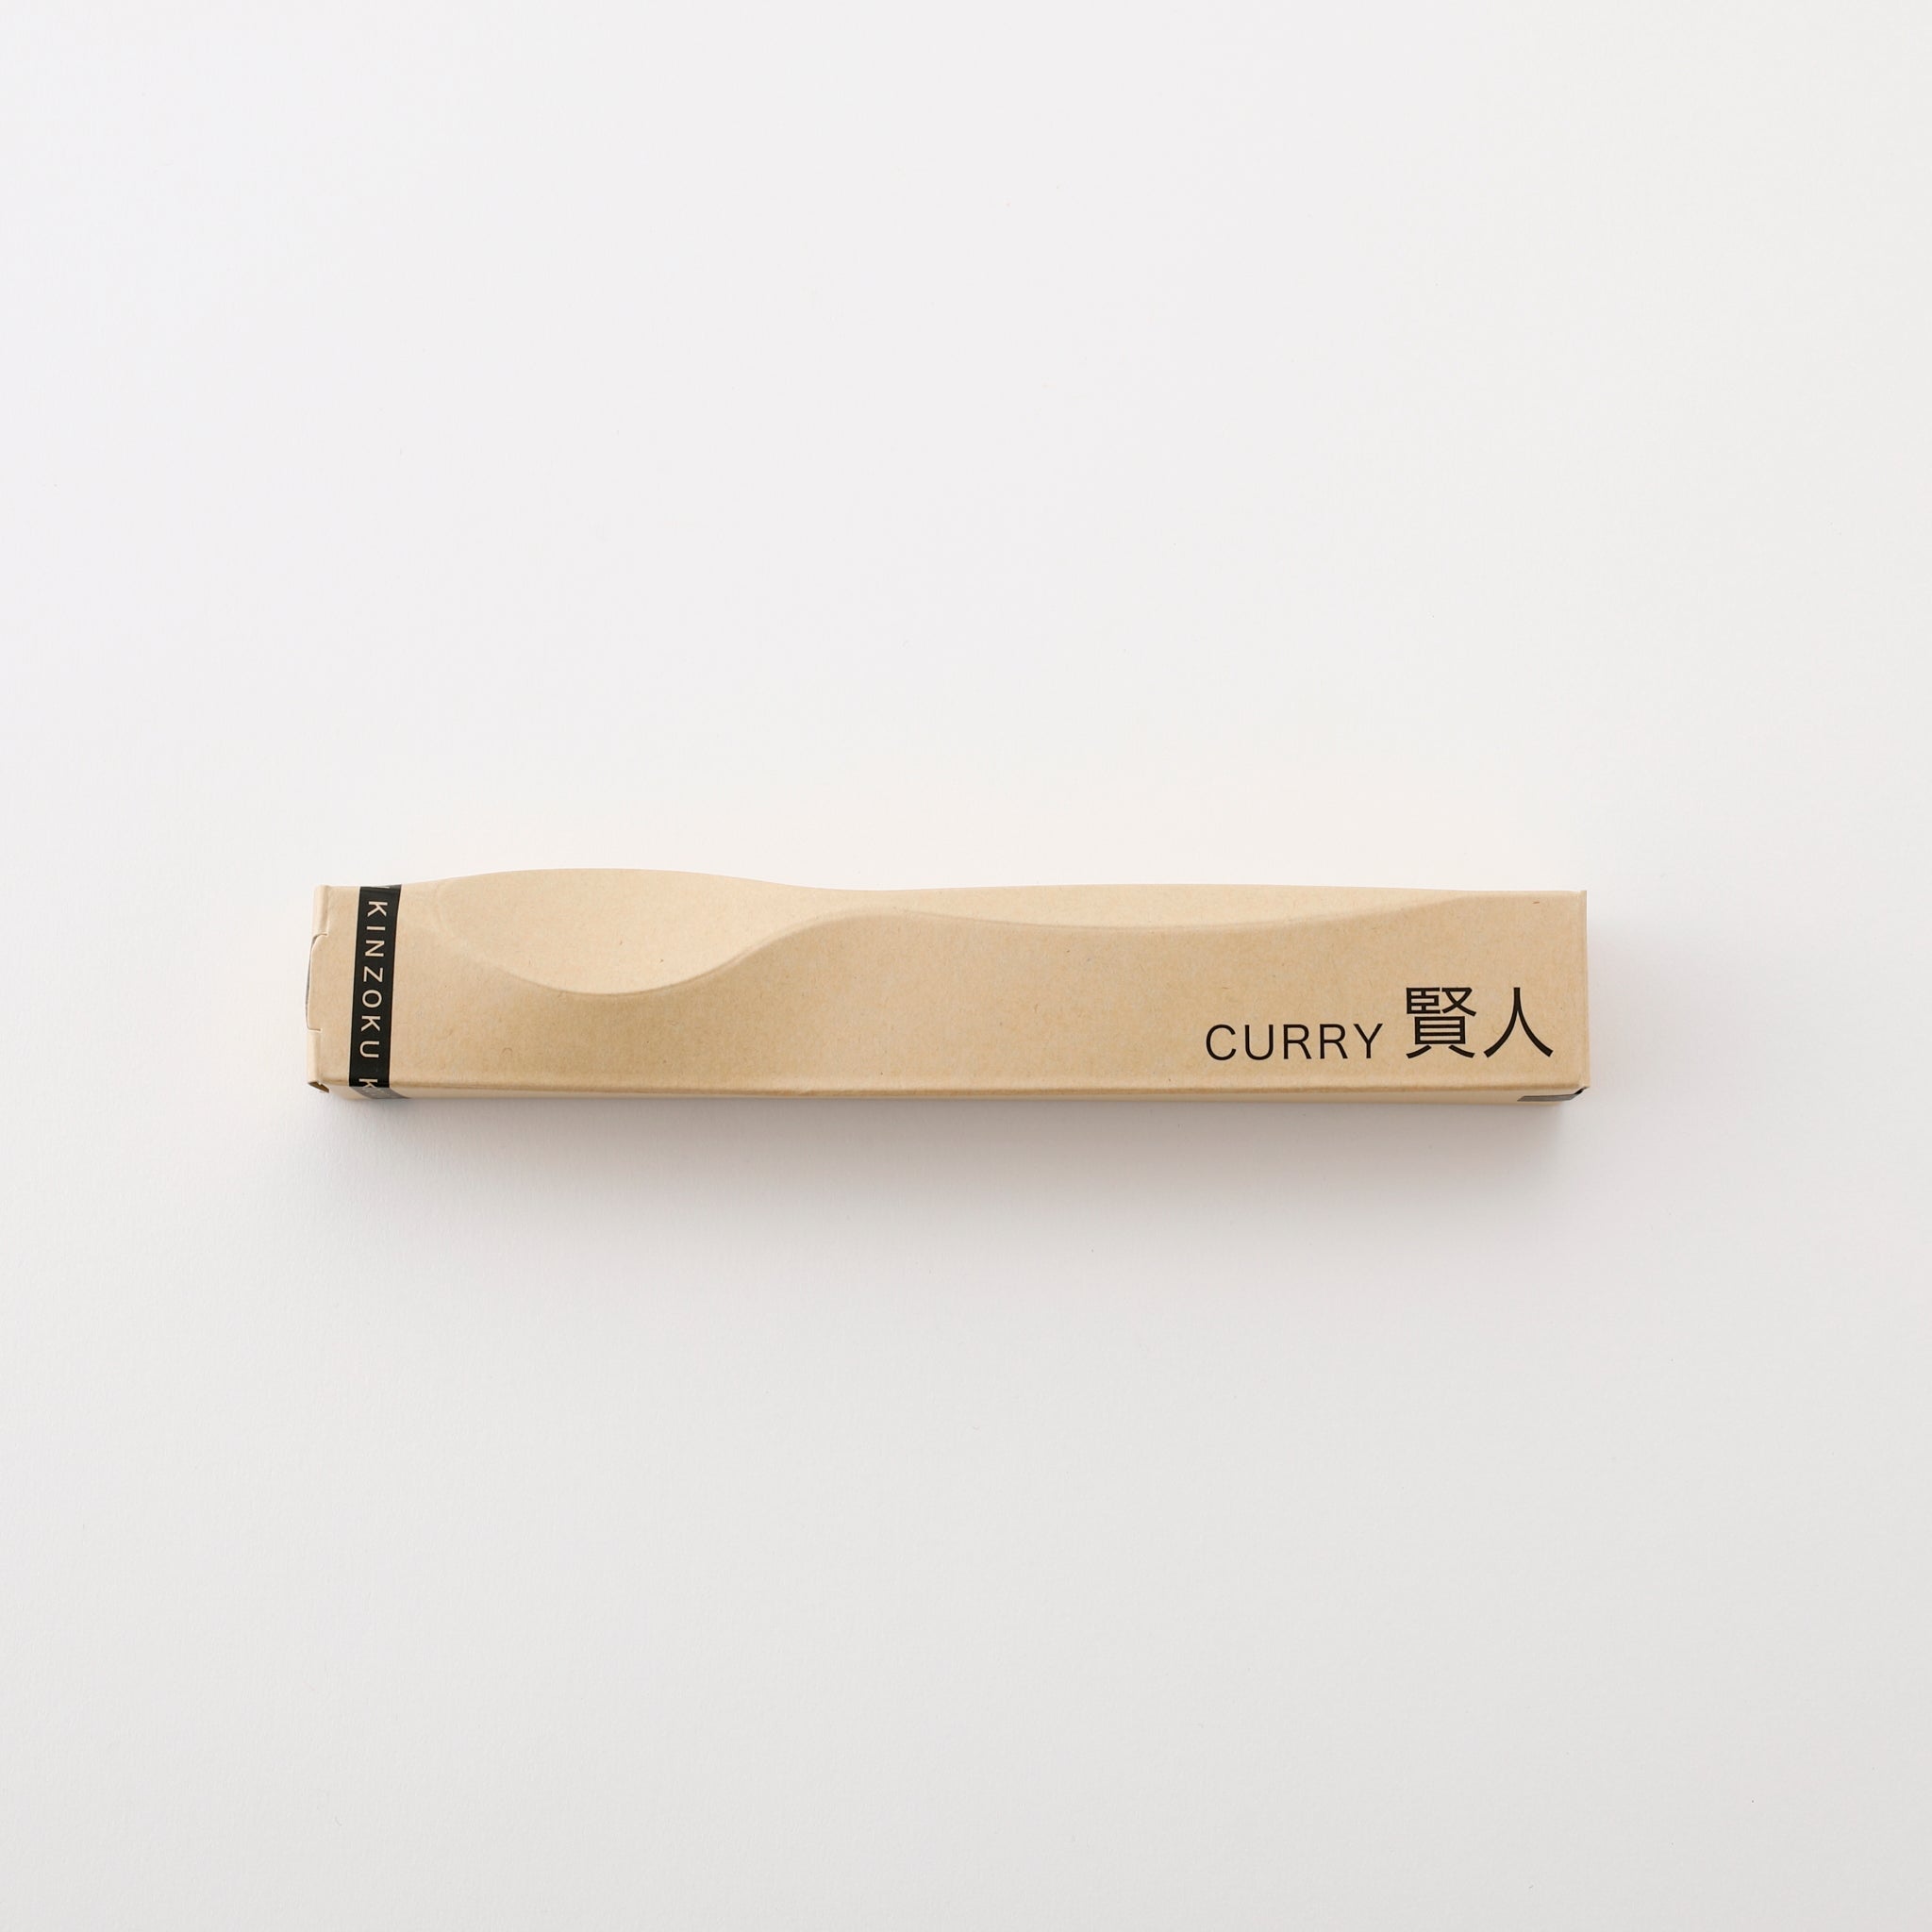 Japanese Curry Spoon